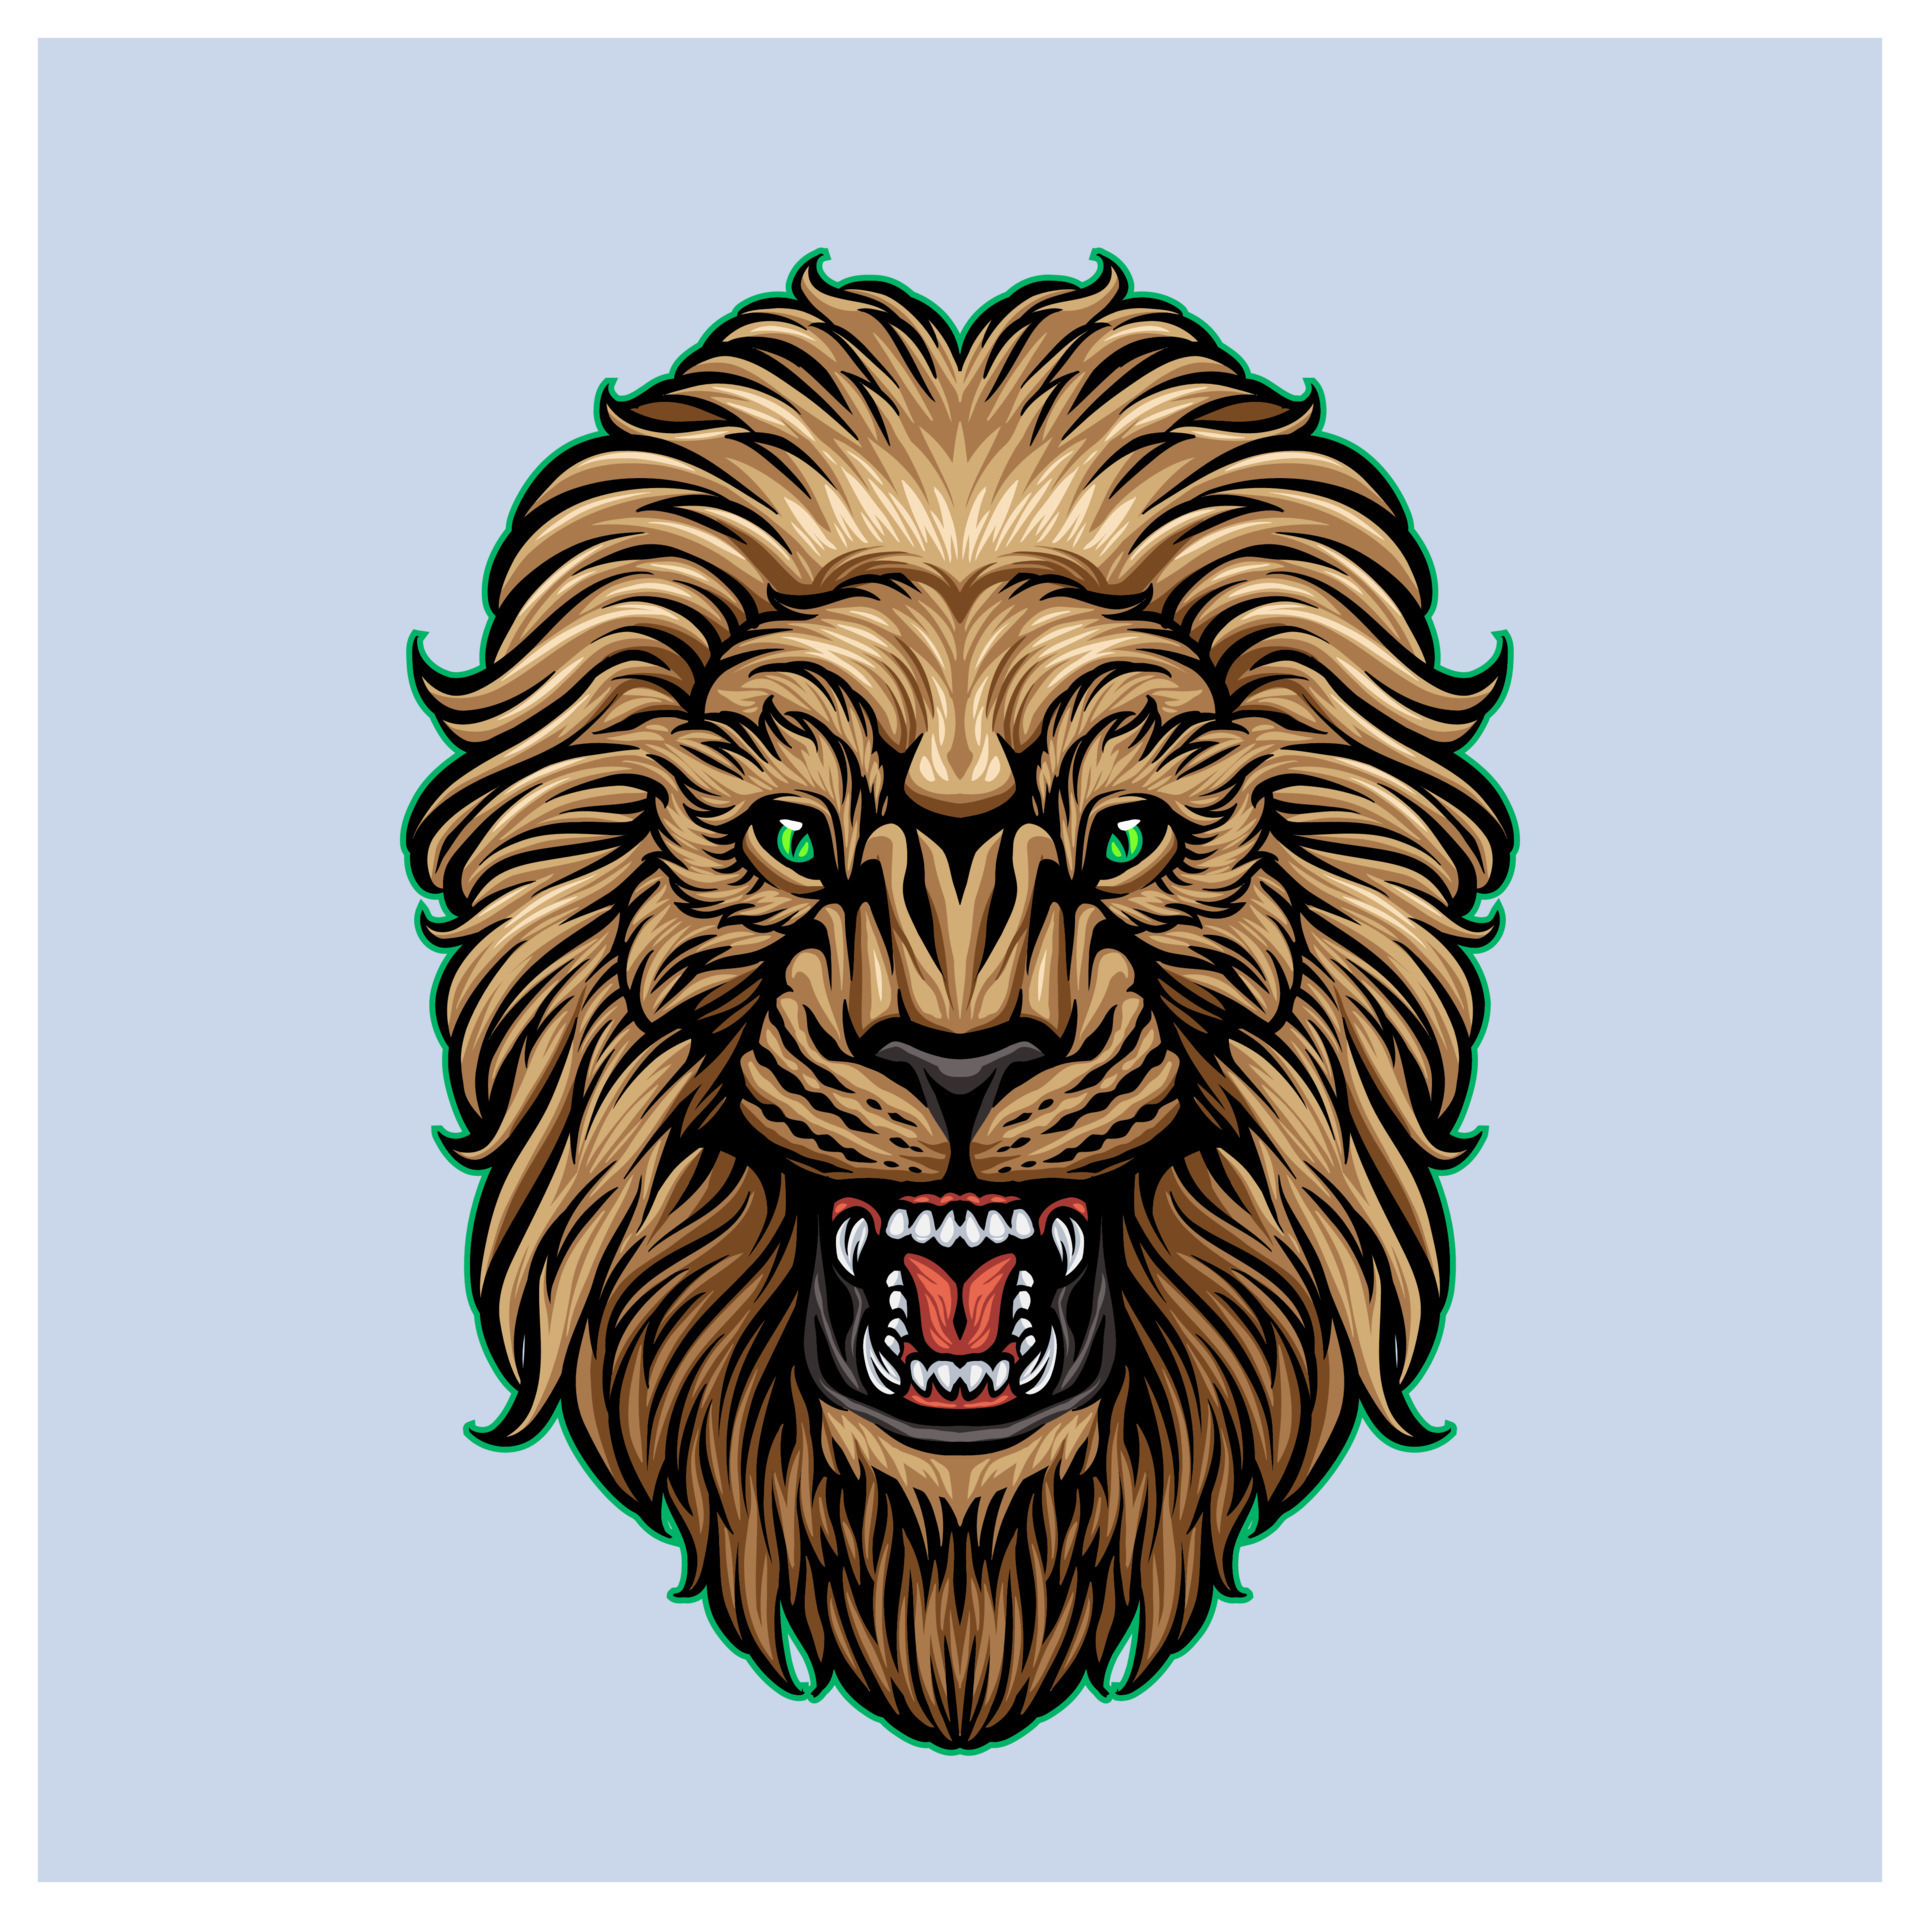 Roaring Lion Head Graphic For T-Shirt And Logo Design 21917930 Vector Art At  Vecteezy